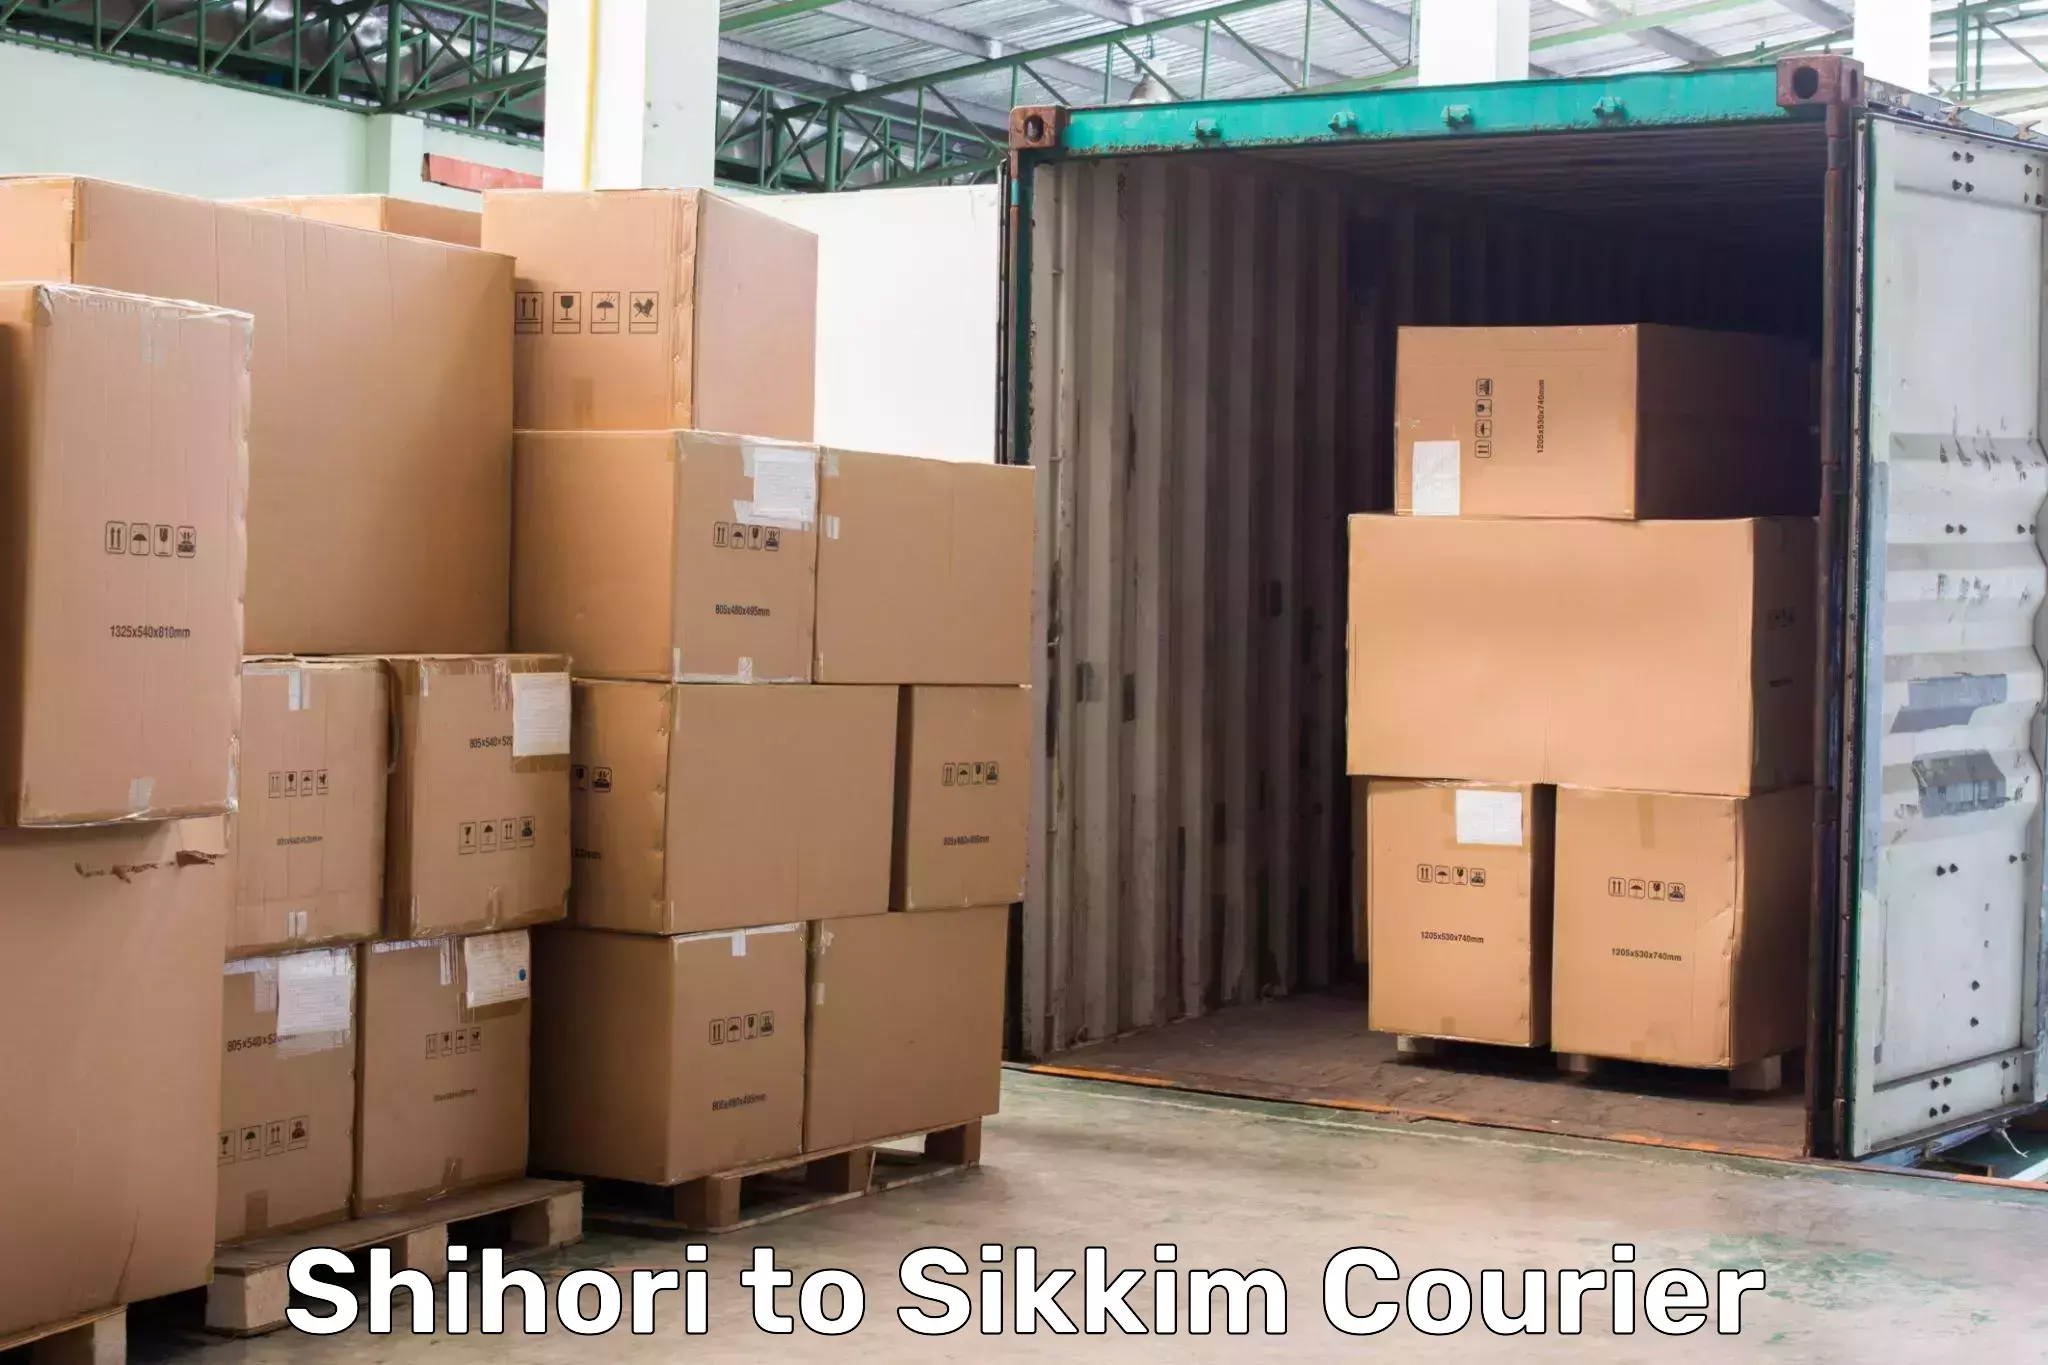 Local courier options Shihori to Sikkim